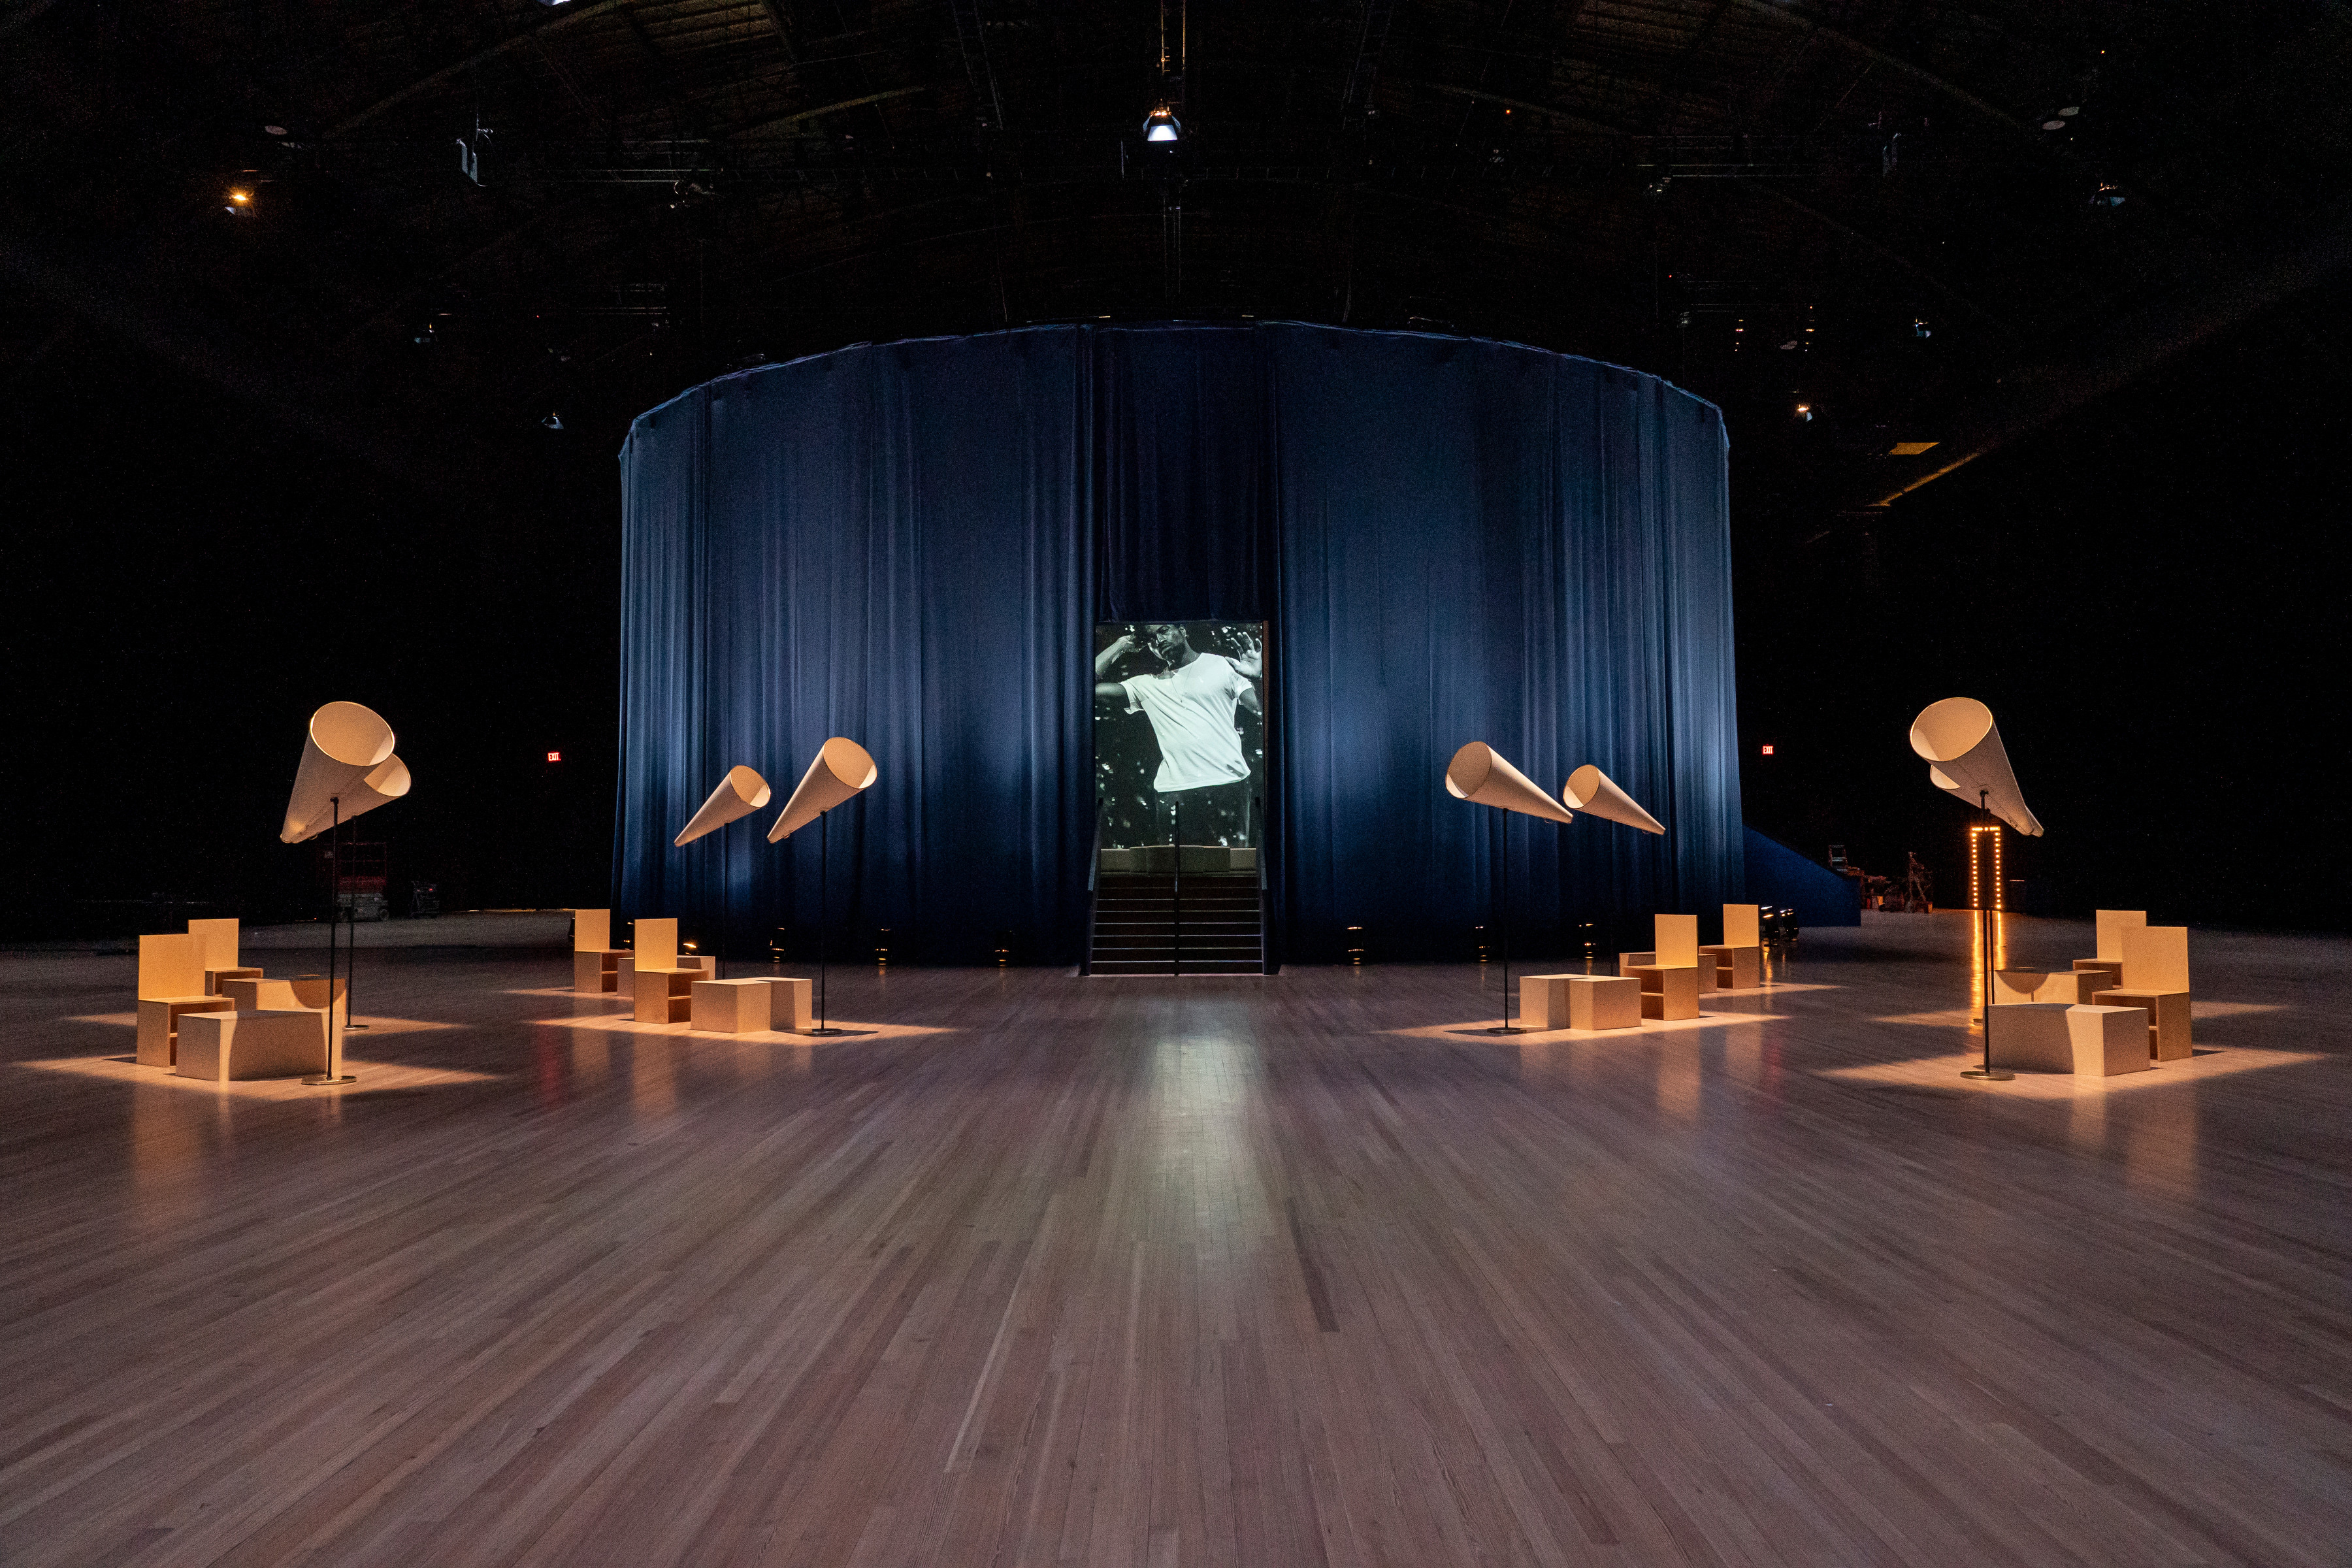 Galerie Barbara Thumm \ Carrie Mae Weems – The Shape of Things – Park Avenue Armory, NY